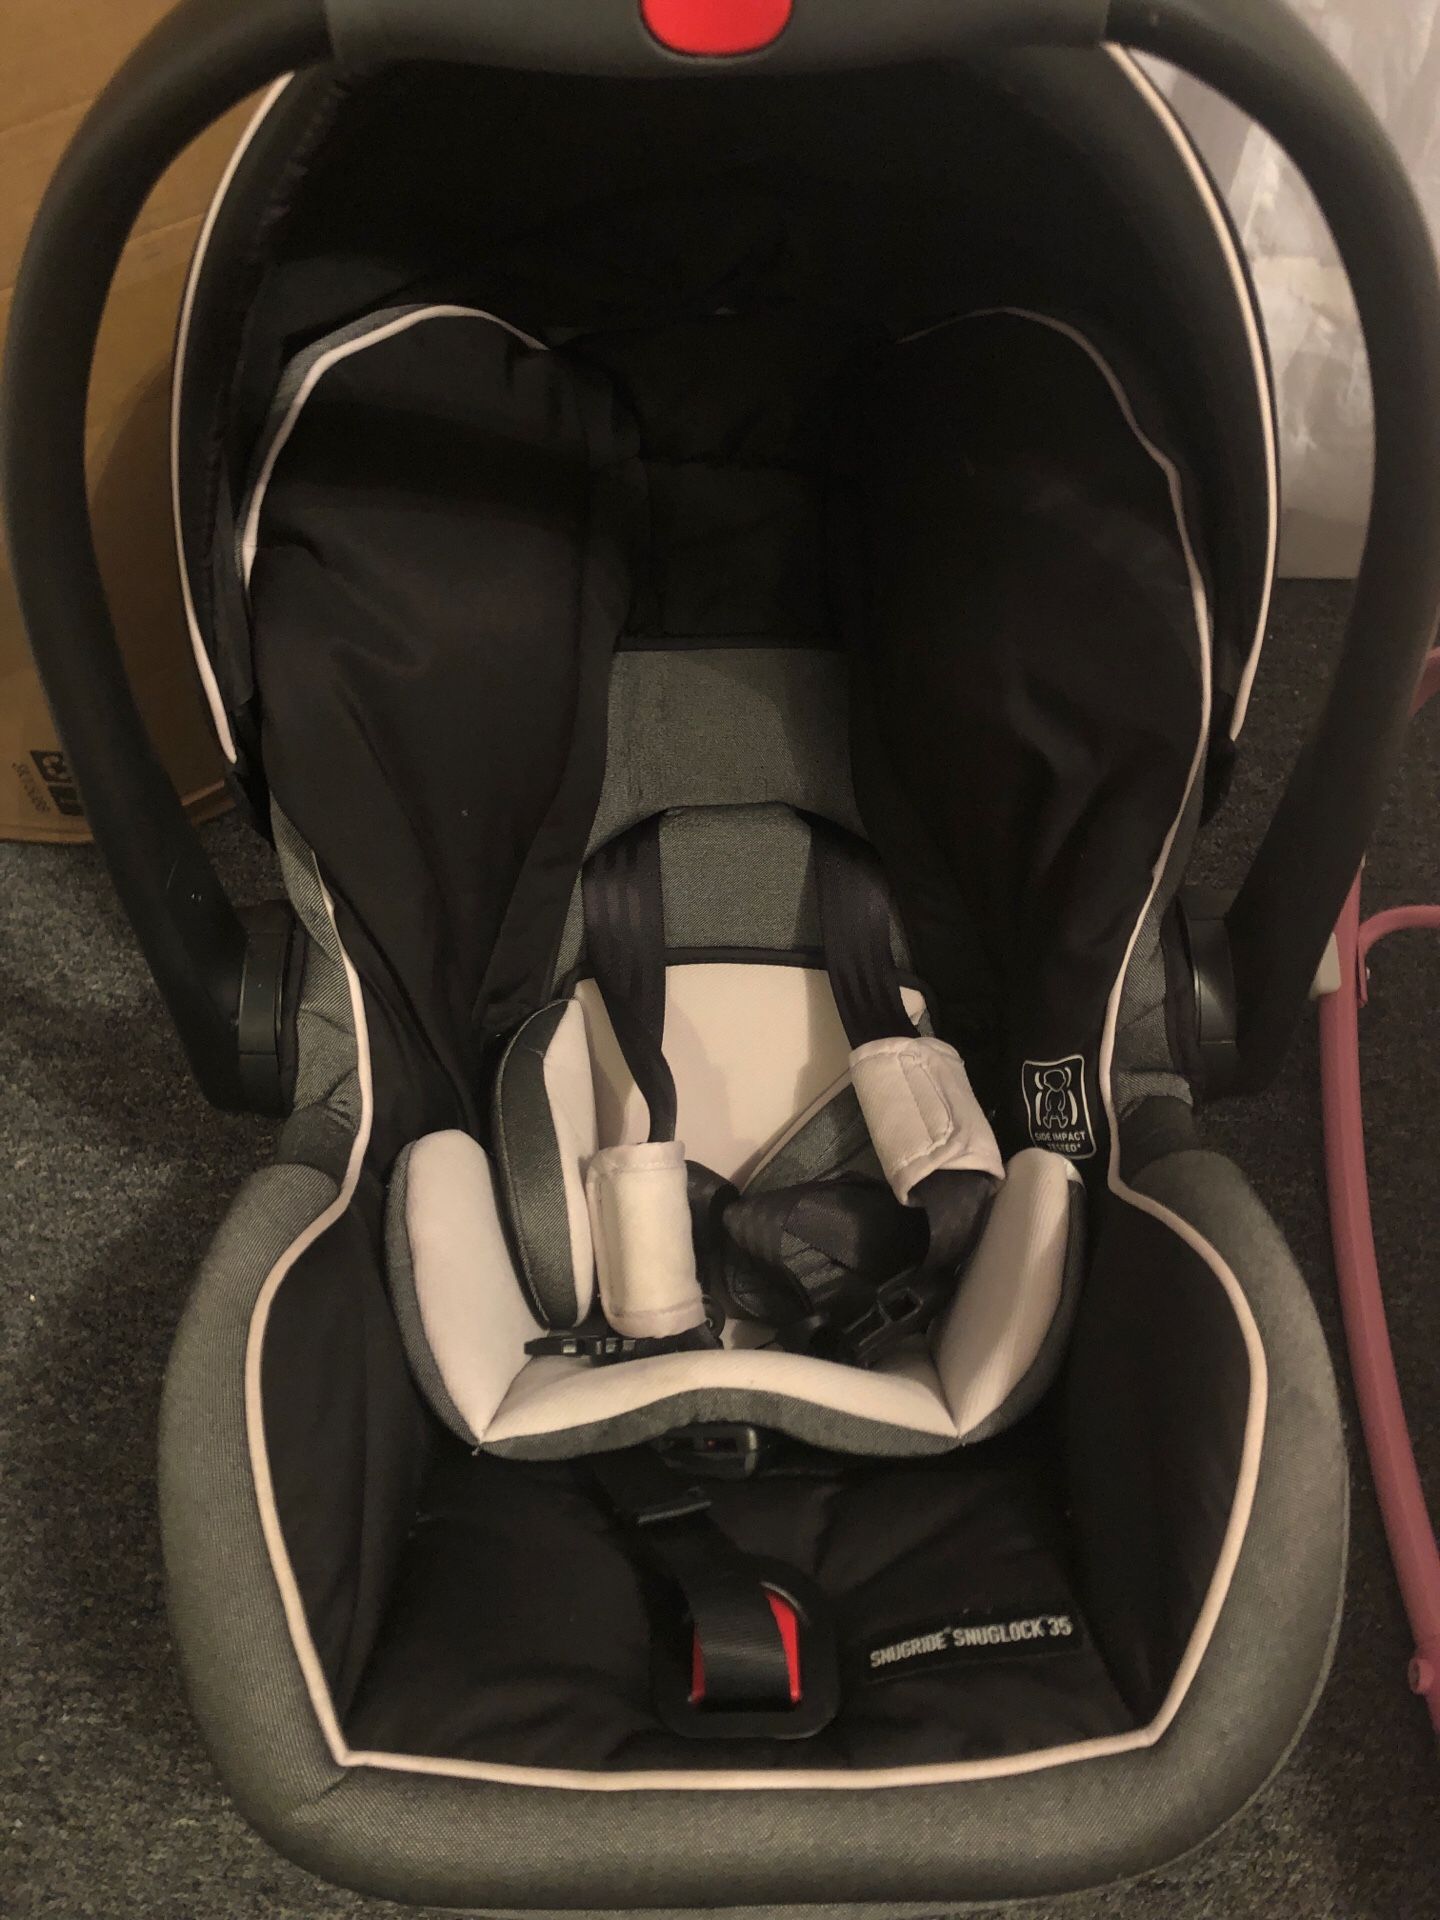 Graco car seat comes with two bases